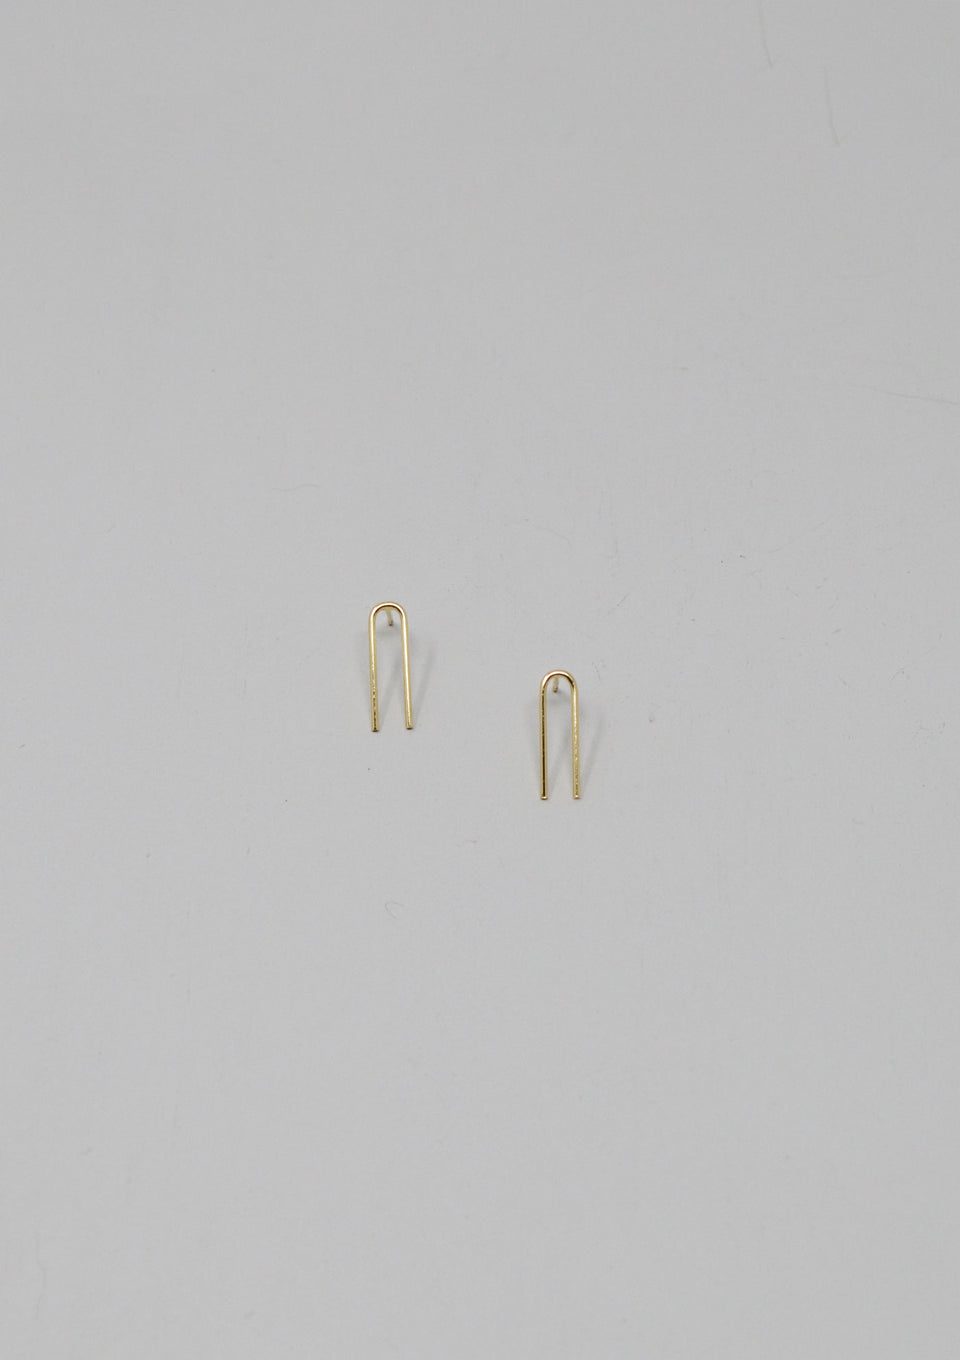 U-Plug Gold Earrings - ANTHER a shop